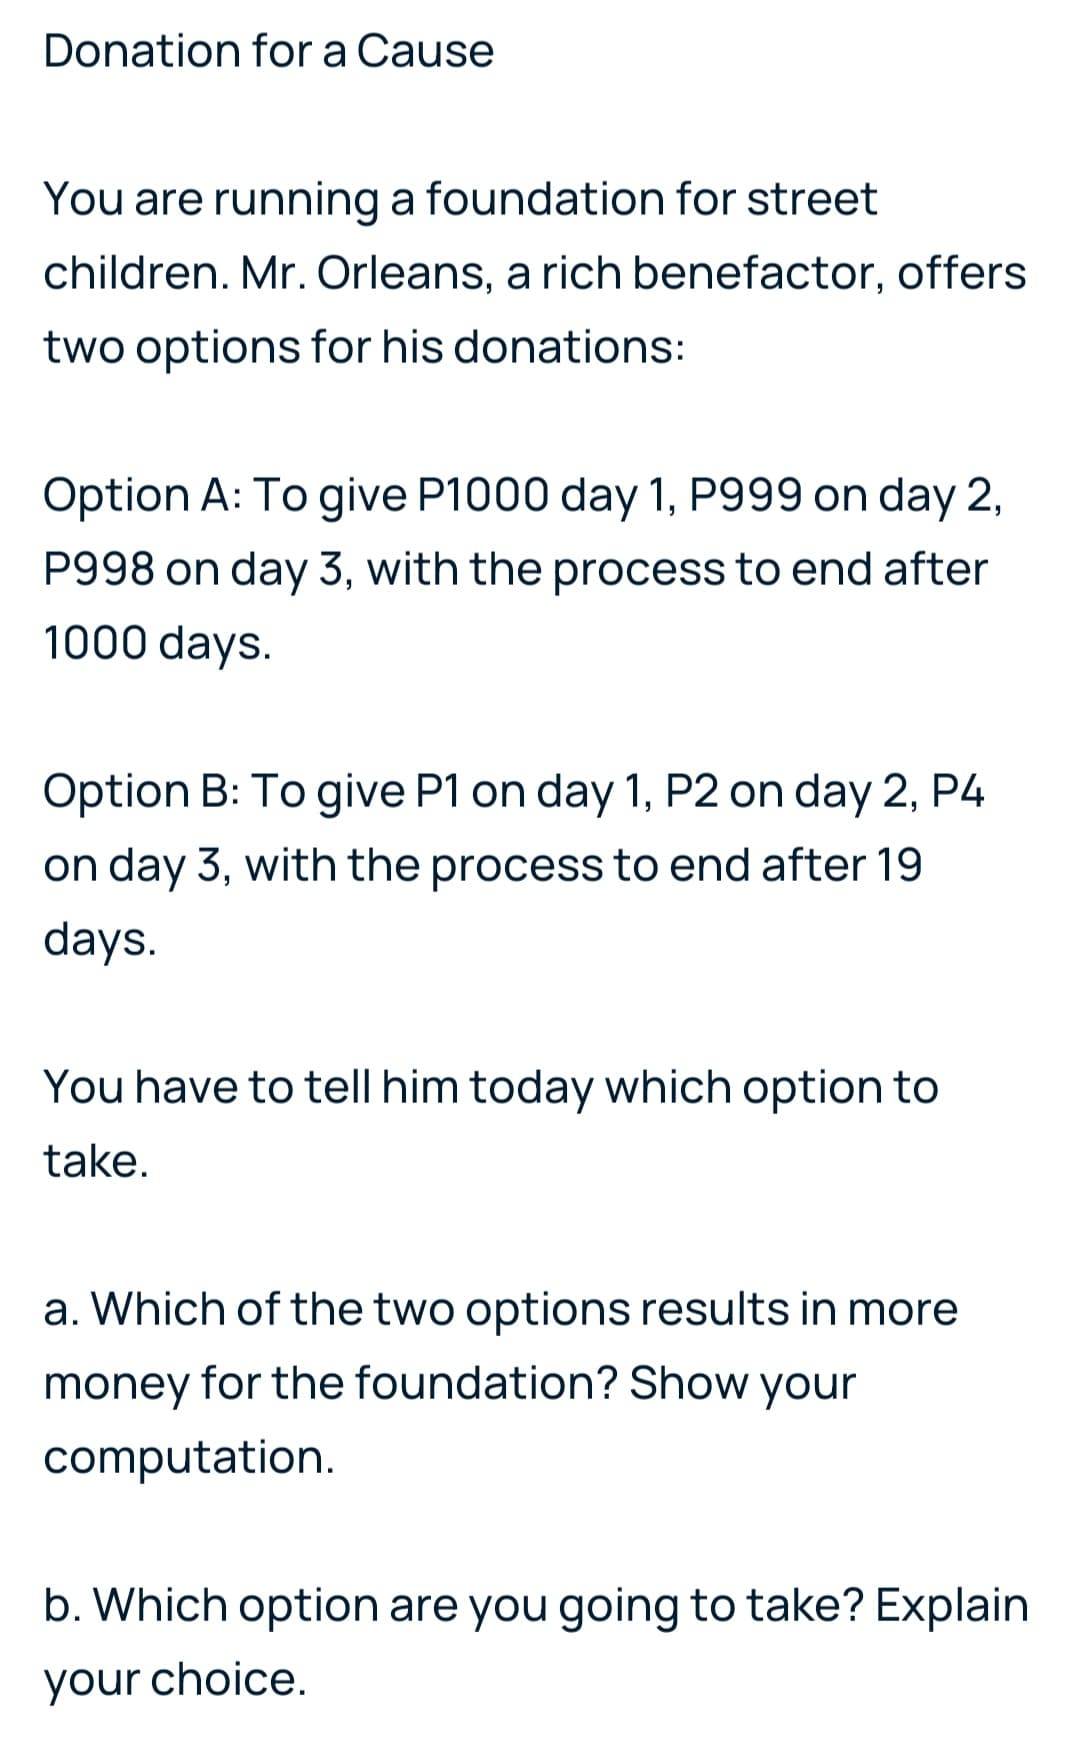 Donation for a Cause
You are running a foundation for street
children. Mr. Orleans, a rich benefactor, offers
two options for his donations:
Option A: To give P1000 day 1, P999 on day 2,
P998 on day 3, with the process to end after
1000 days.
Option B: To give P1 on day 1, P2 on day 2, P4
on day 3, with the process to end after 19
days.
You have to tell him today which option to
take.
a. Which of the two options results in more
money for the foundation? Show your
computation.
b. Which option are you going to take? Explain
your choice.
